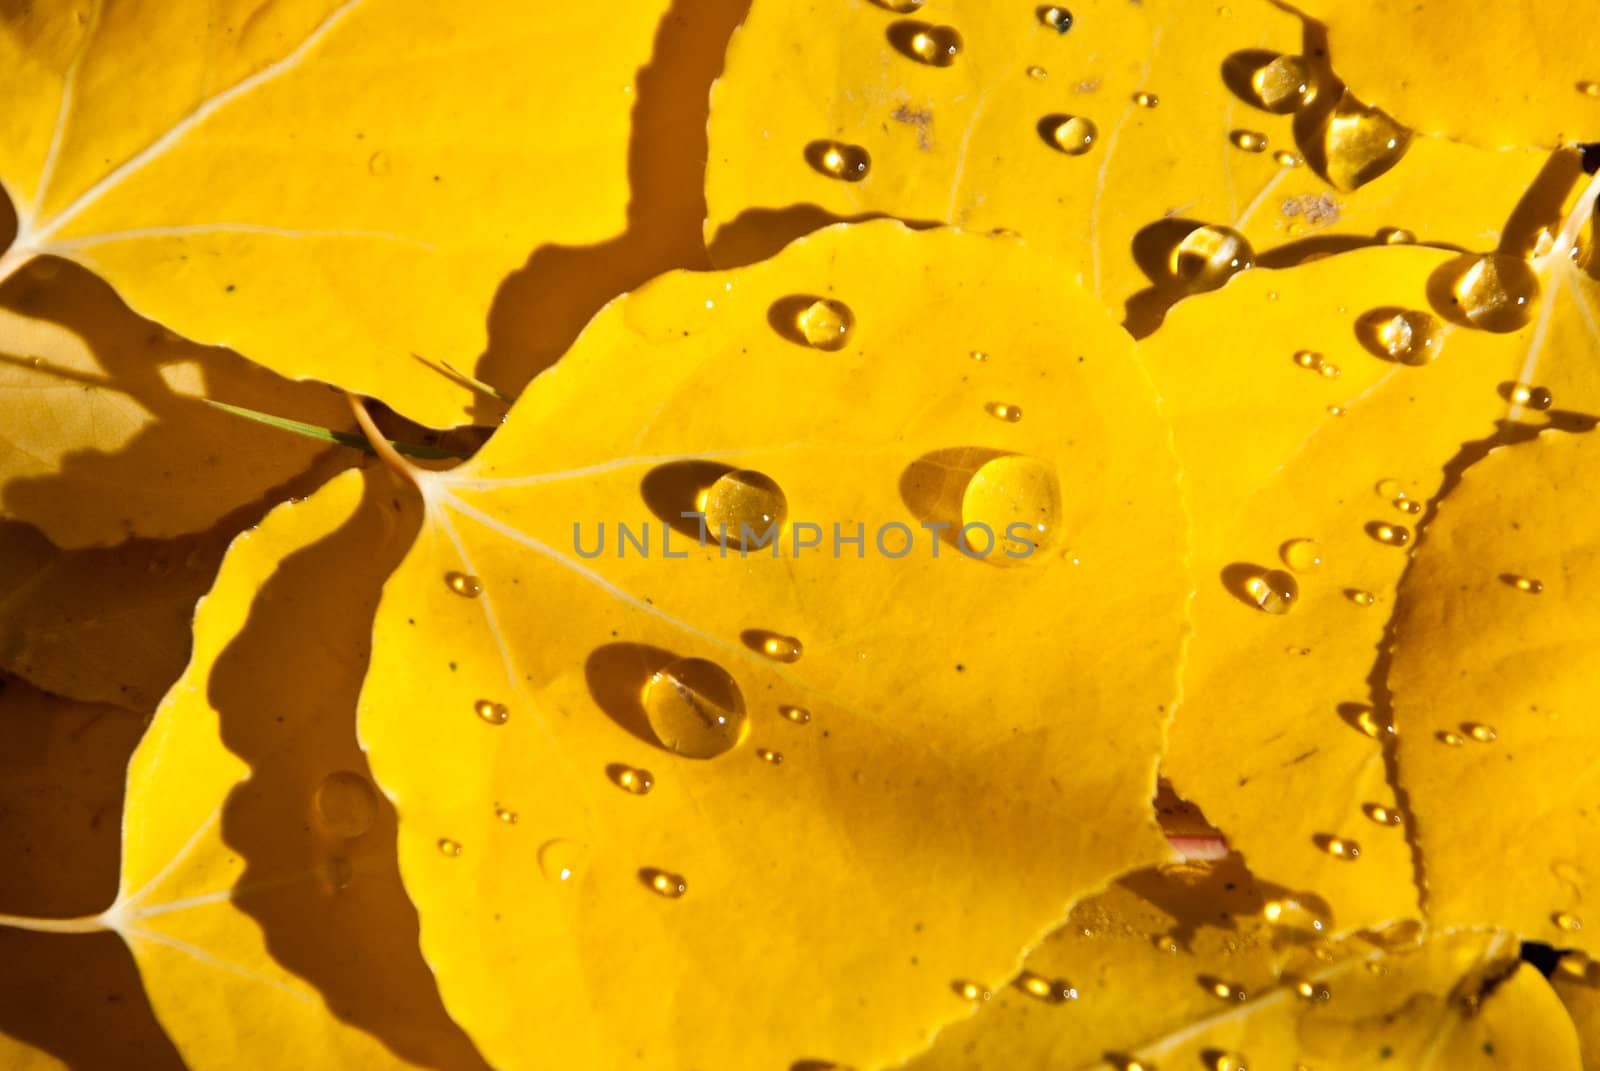 Morning dew on Yewllow aspen leaves by emattil